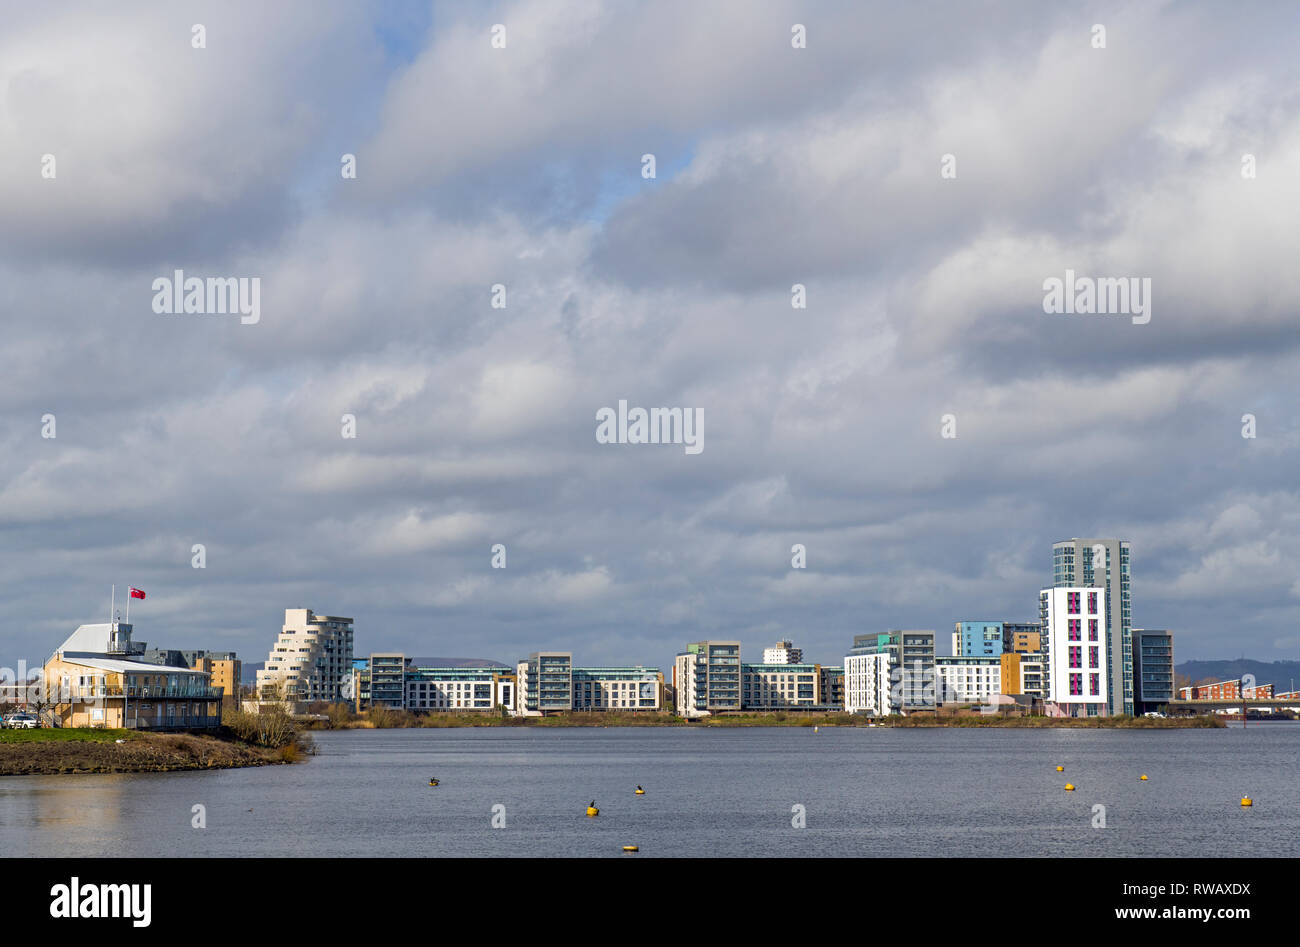 Looking across Cardiff Bay to new apartments and living accommodation  - Cardiff Bay has been the subject of much urban regeneration and it continues. Stock Photo